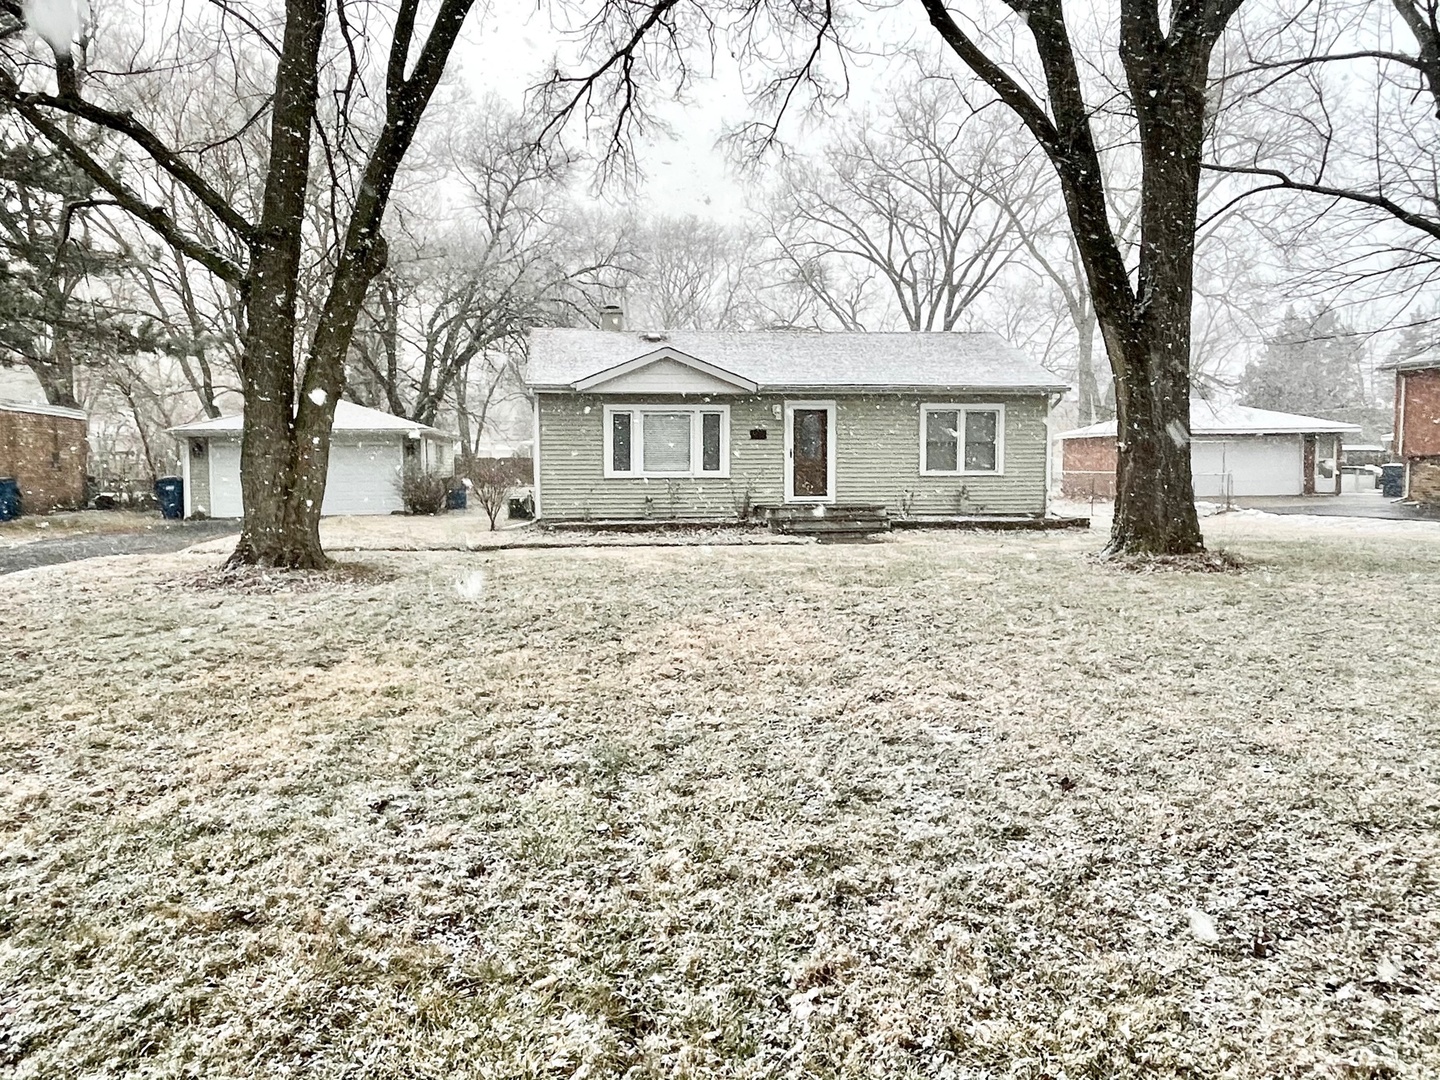 a front view of a house with a yard covered in snow